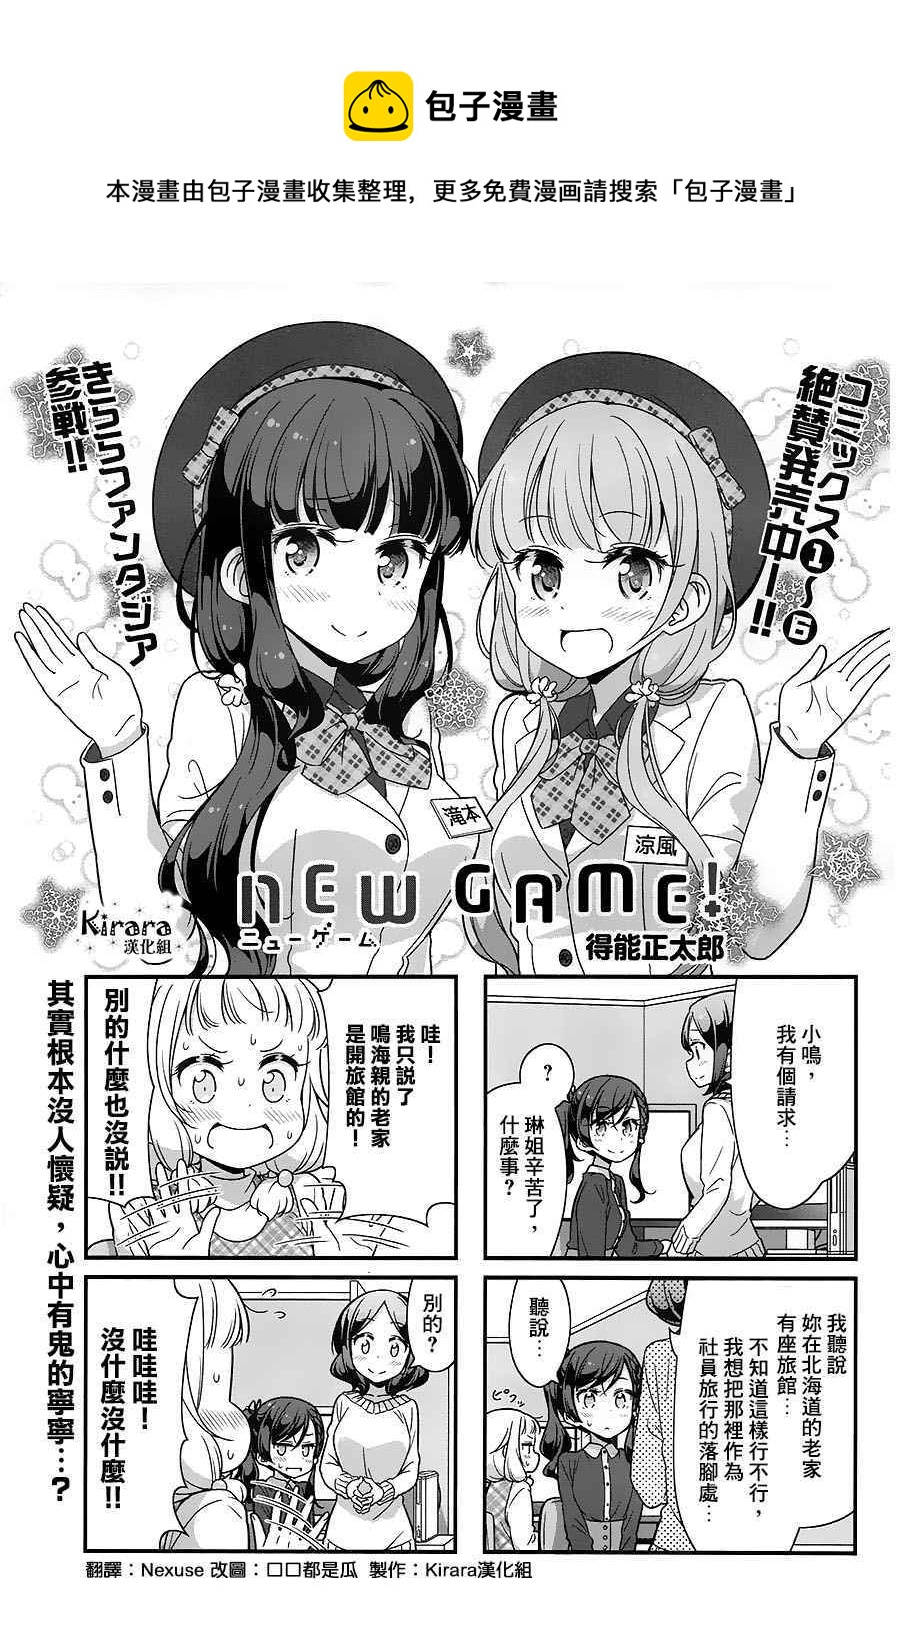 NEW GAME! - 70 第70話 - 1